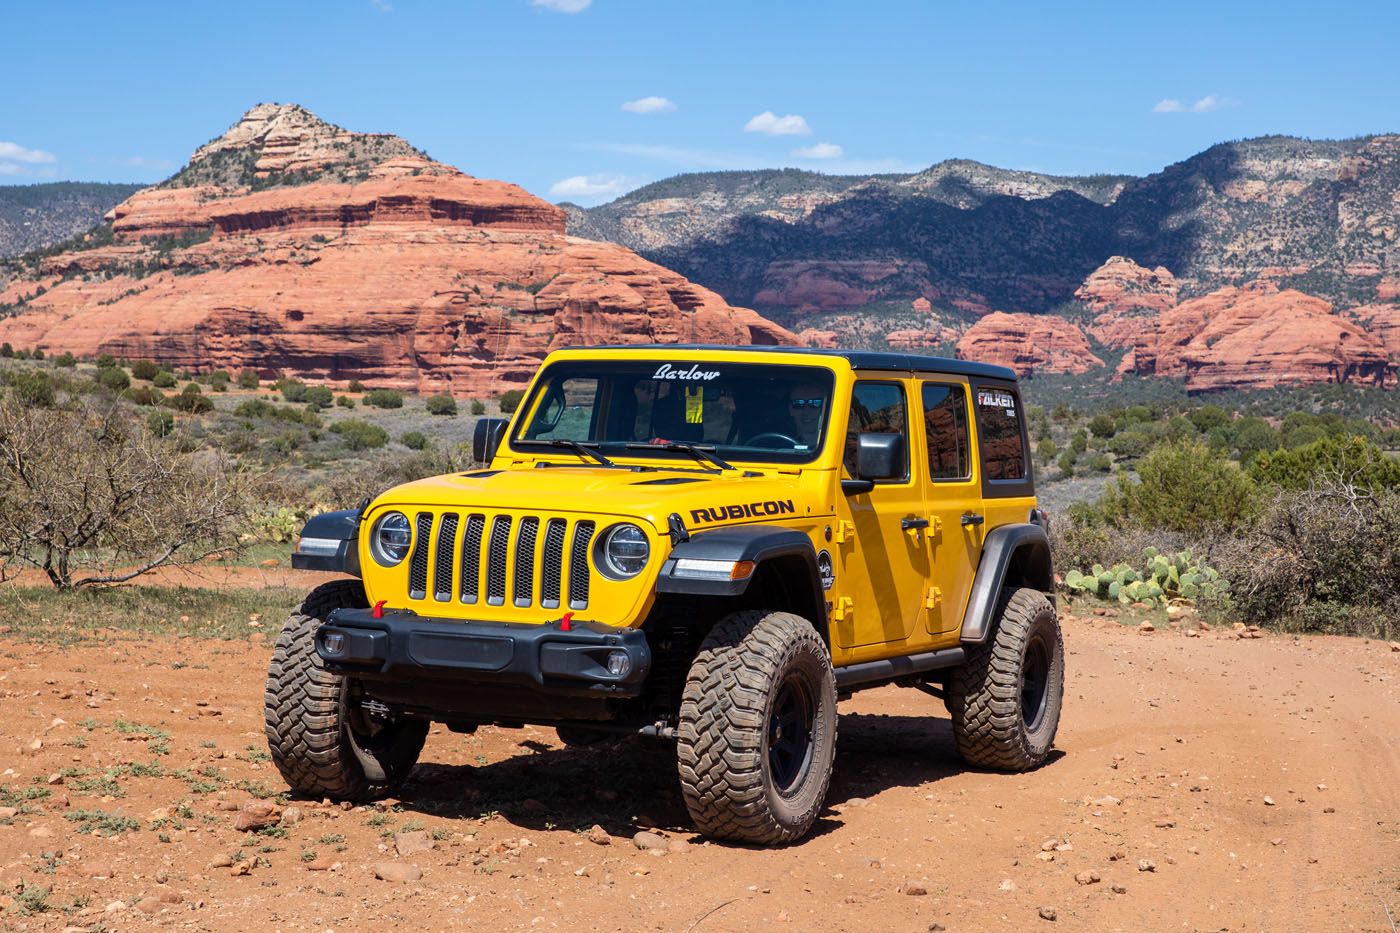 Our Jeep 4WD roads in Sedona